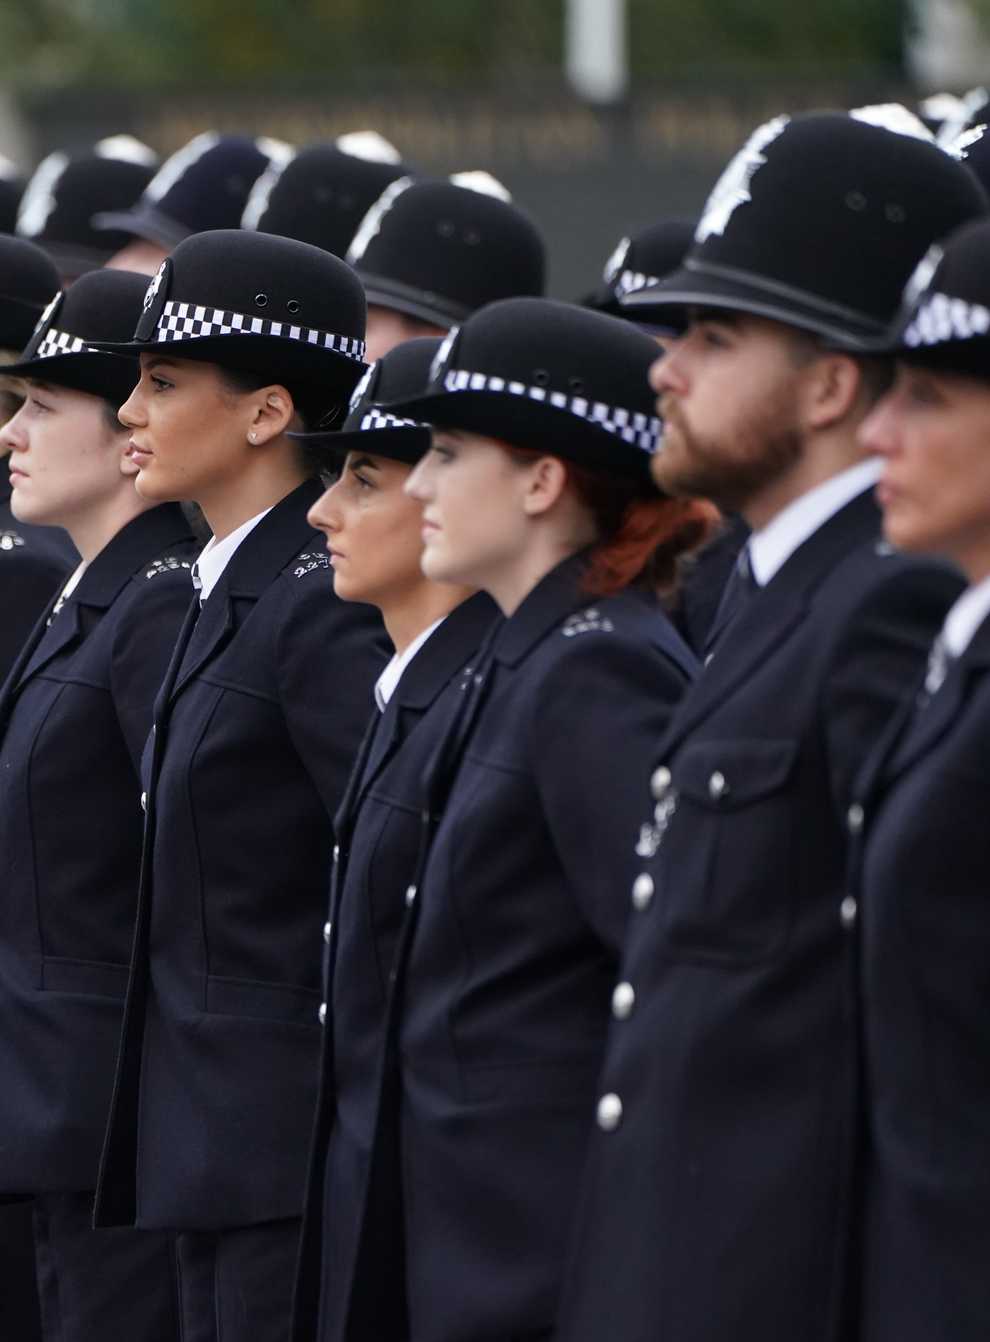 The Home Office expects to spend £3.6 billion on the police recruitment programme by March (Kirsty O’Connor/PA)